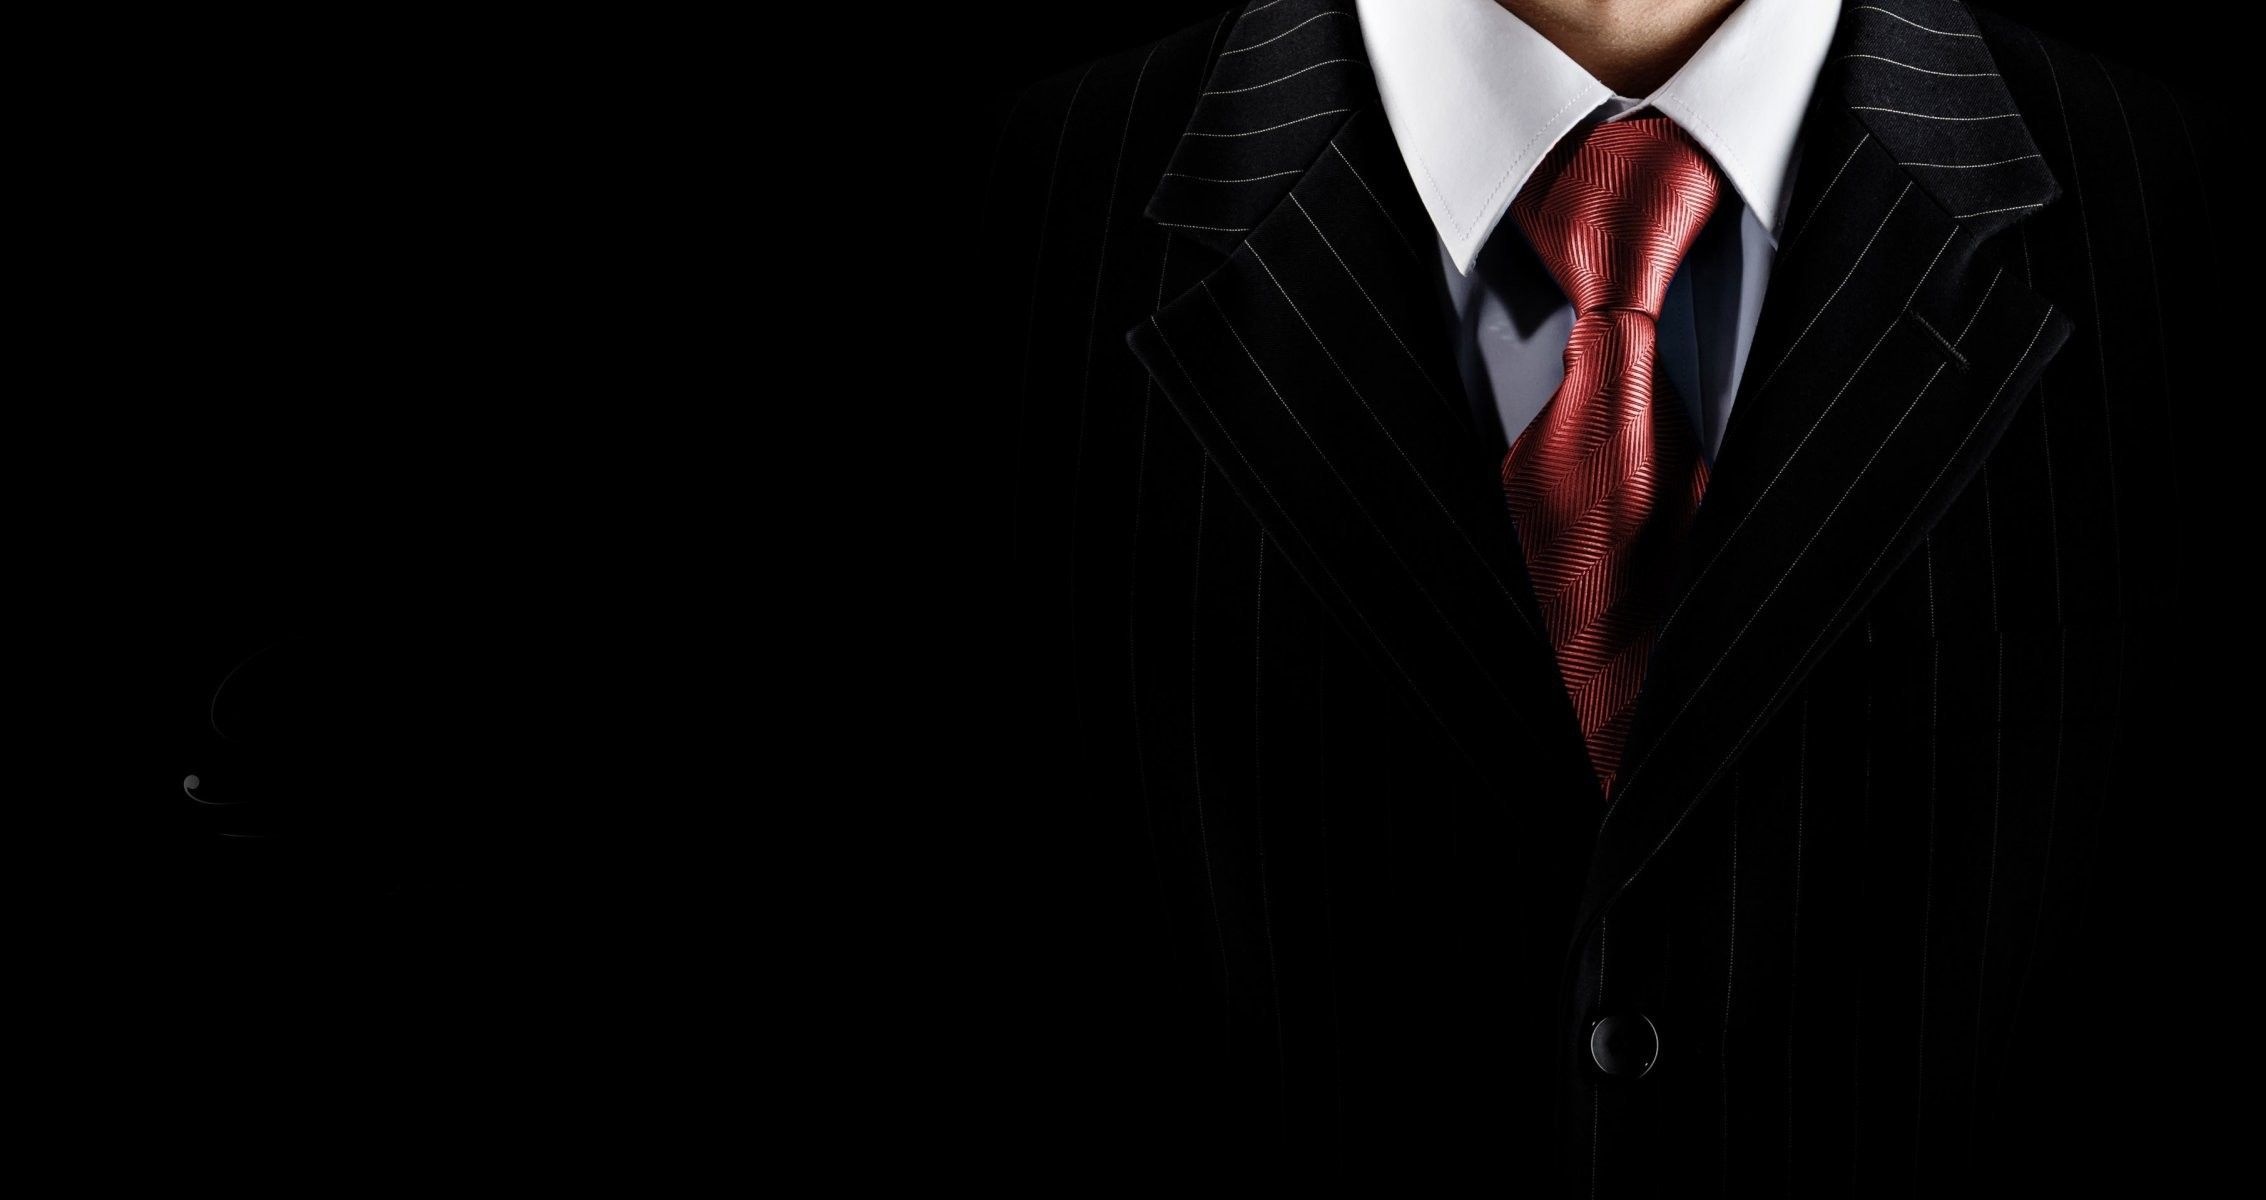 Suit and tie, Top free backgrounds, Formal attire, Professional look, 2270x1200 HD Desktop